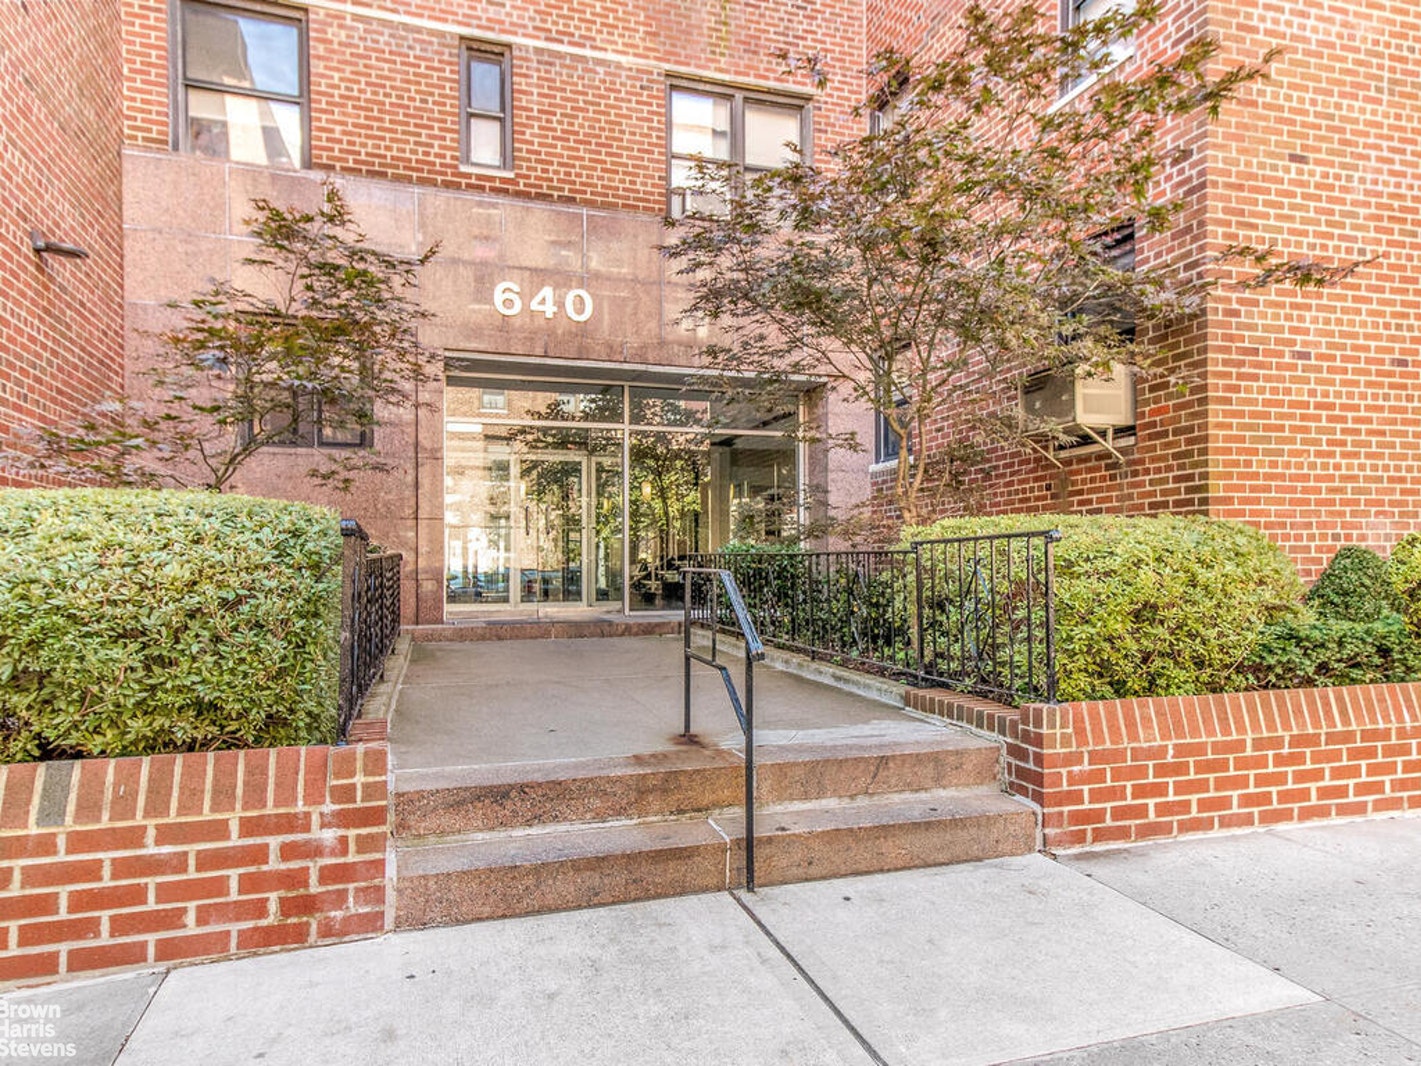 640 West 239th Street, New York City NY 10463 A.N Shell Realty